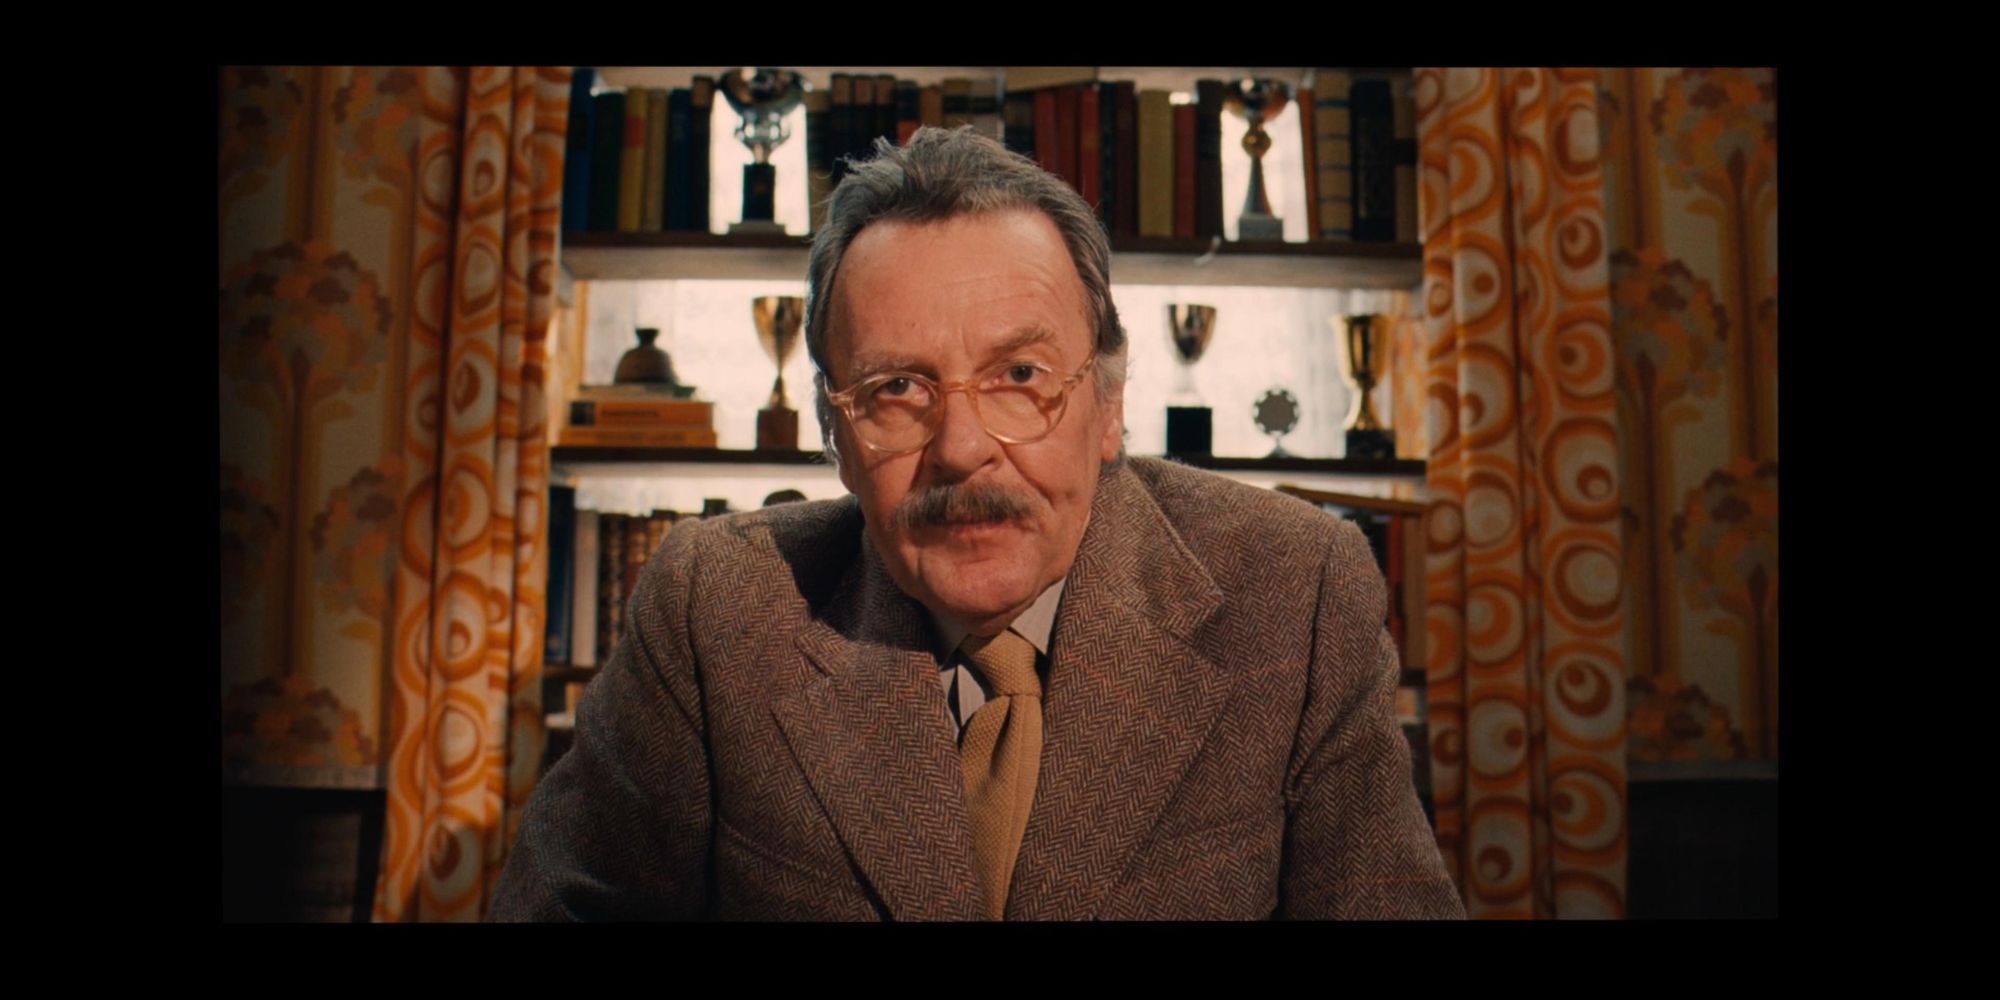 Tom Wilkinson as the Author in The Grand Budapest Hotel